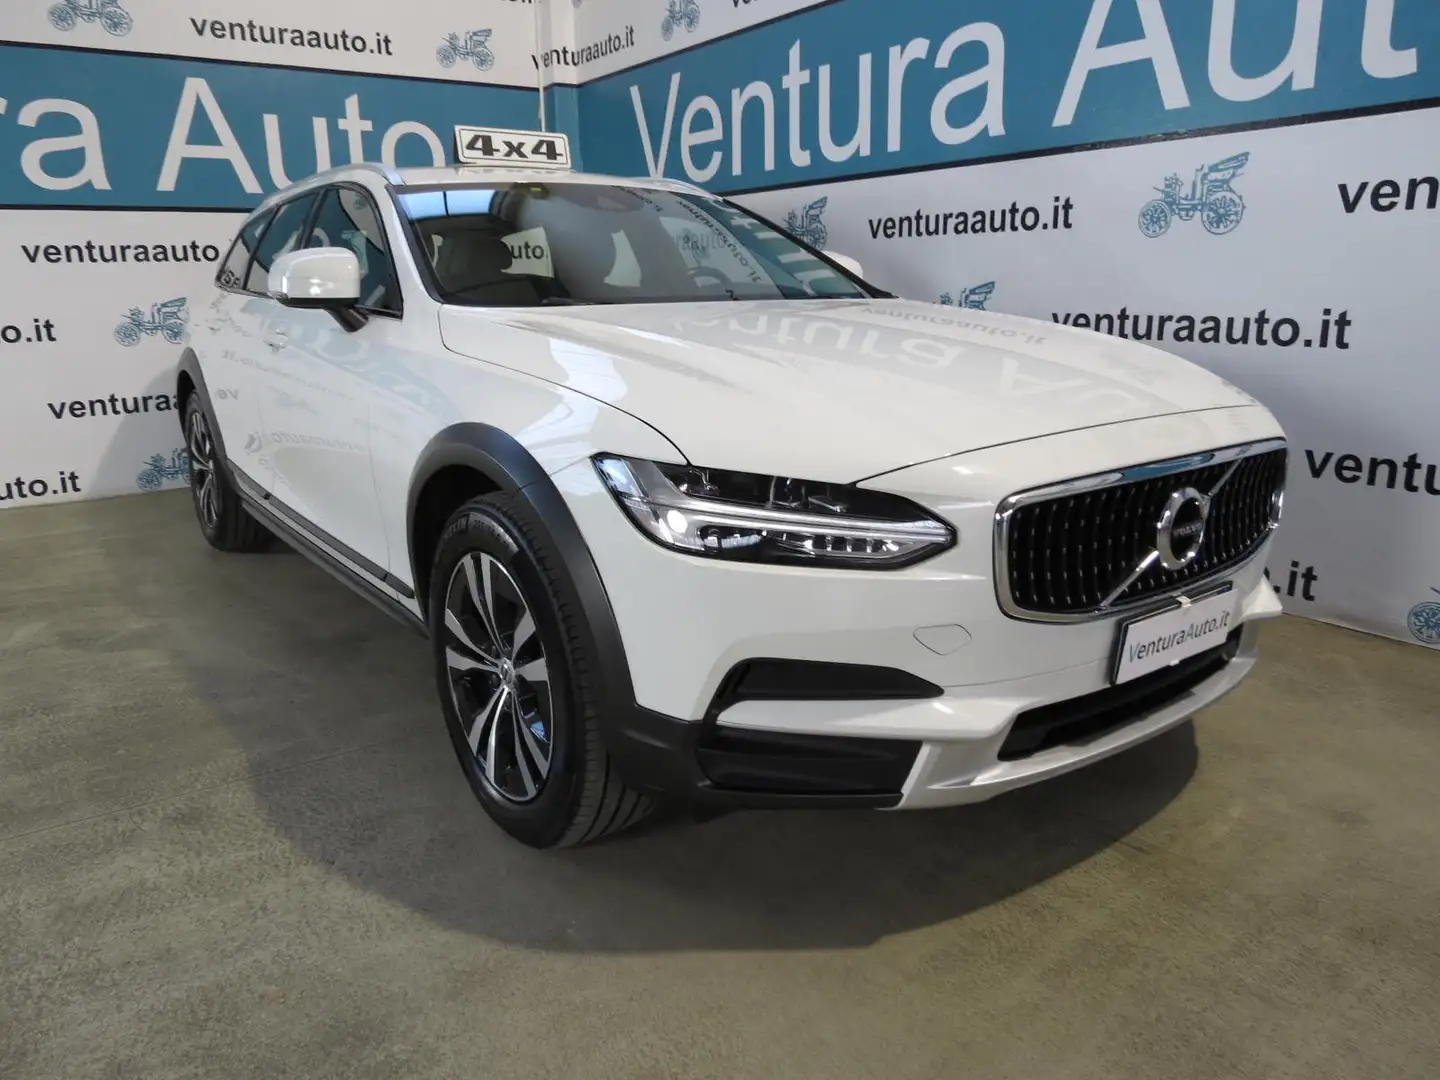 Volvo V90 Cross Country 2.0 D4 190 CV BUSINESS PLUS AWD GEARTRONIC Bianco - 1